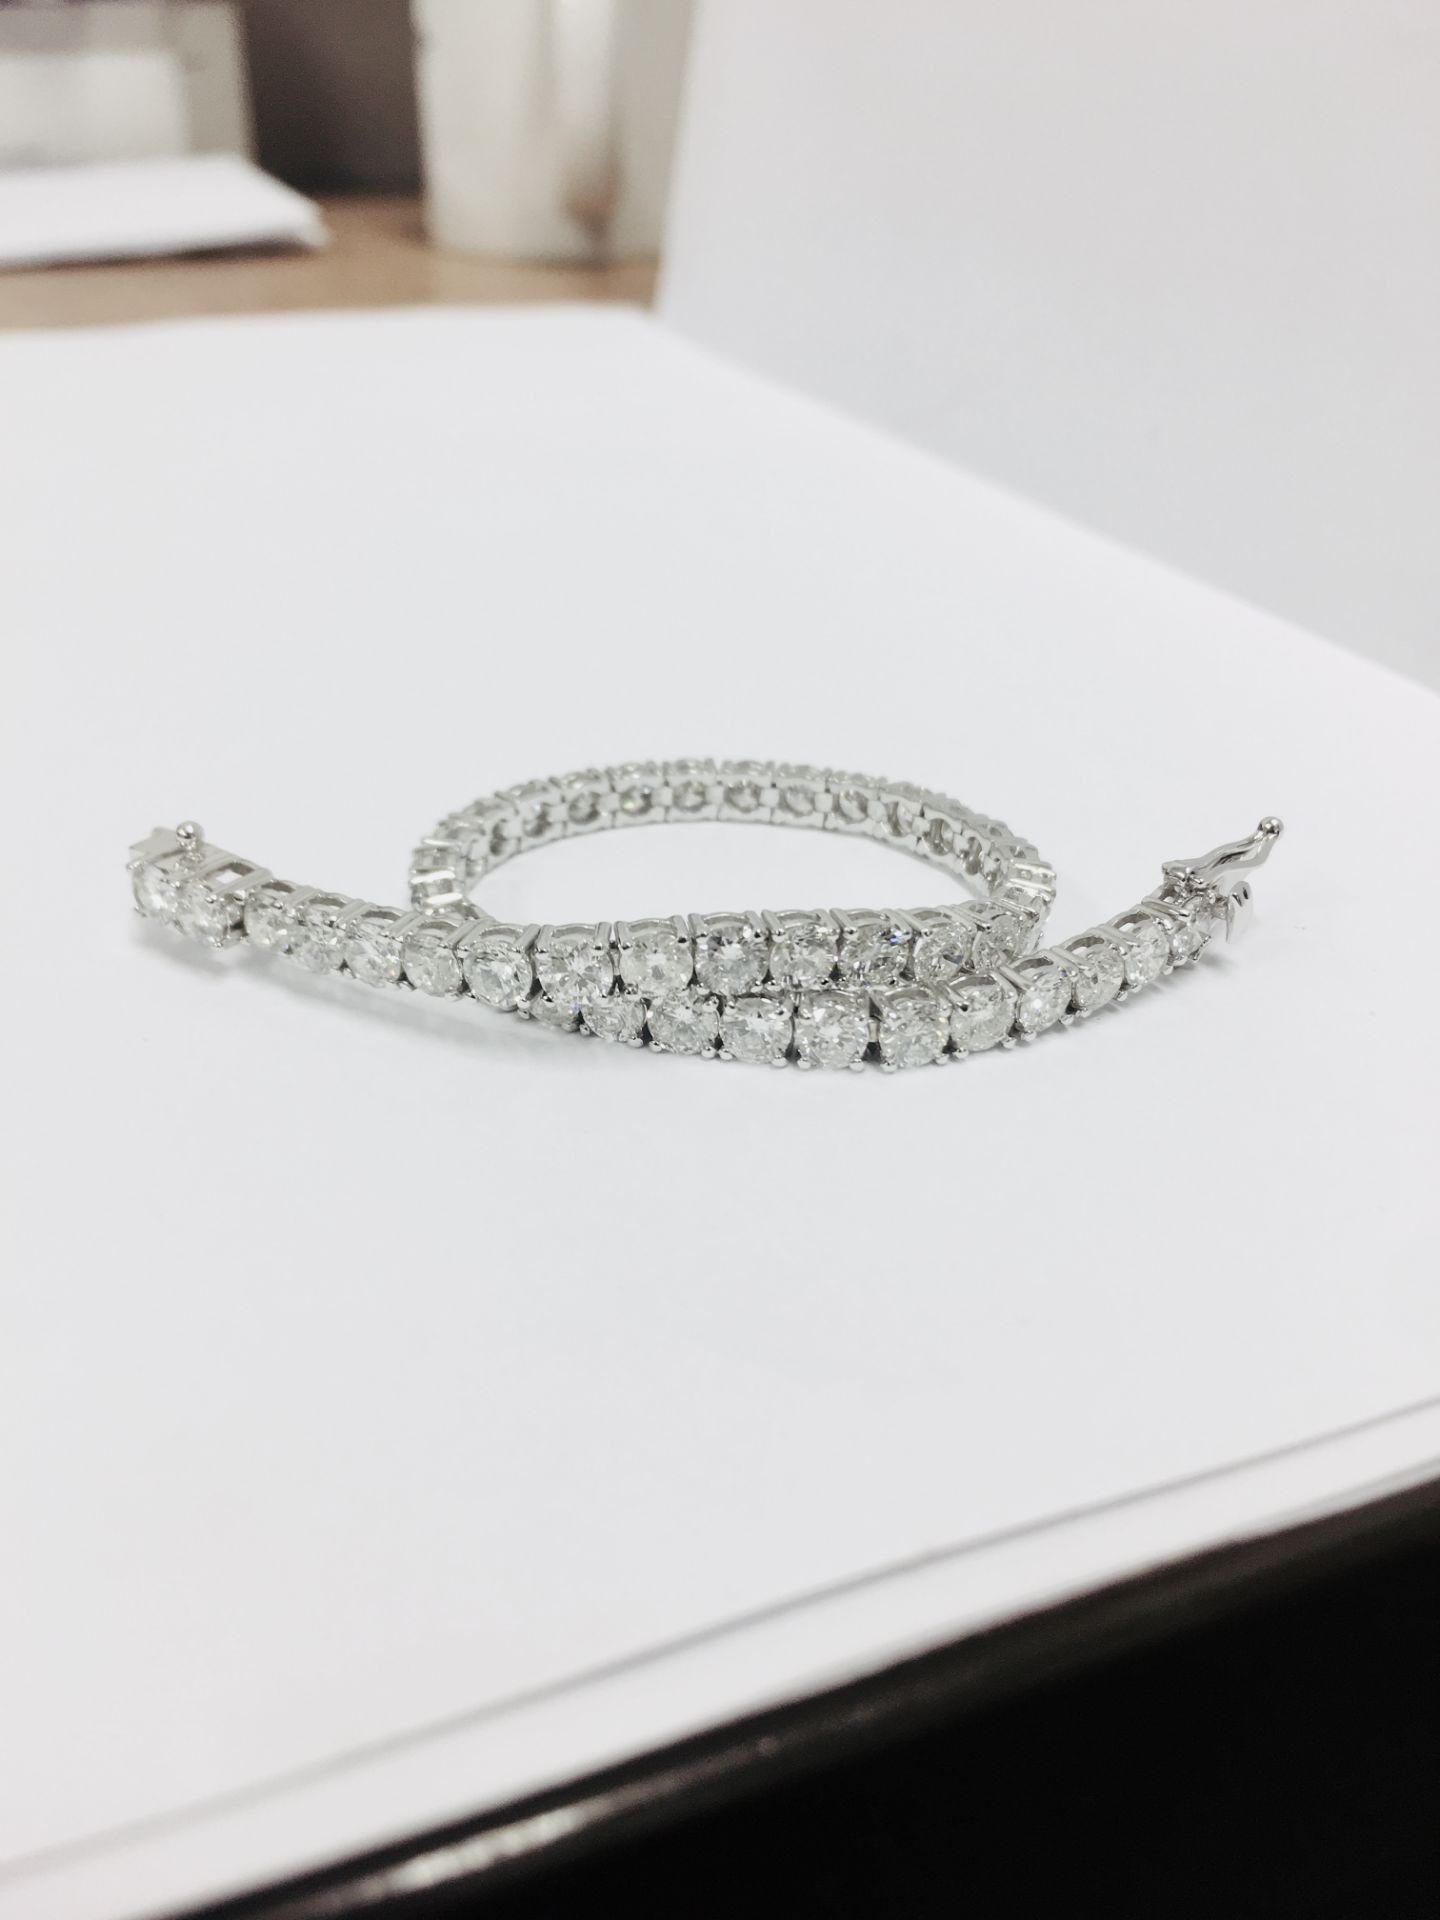 10.50ct Diamond tennis bracelet set with brilliant cut diamonds of I colour, si2 clarity. All set in - Image 3 of 7